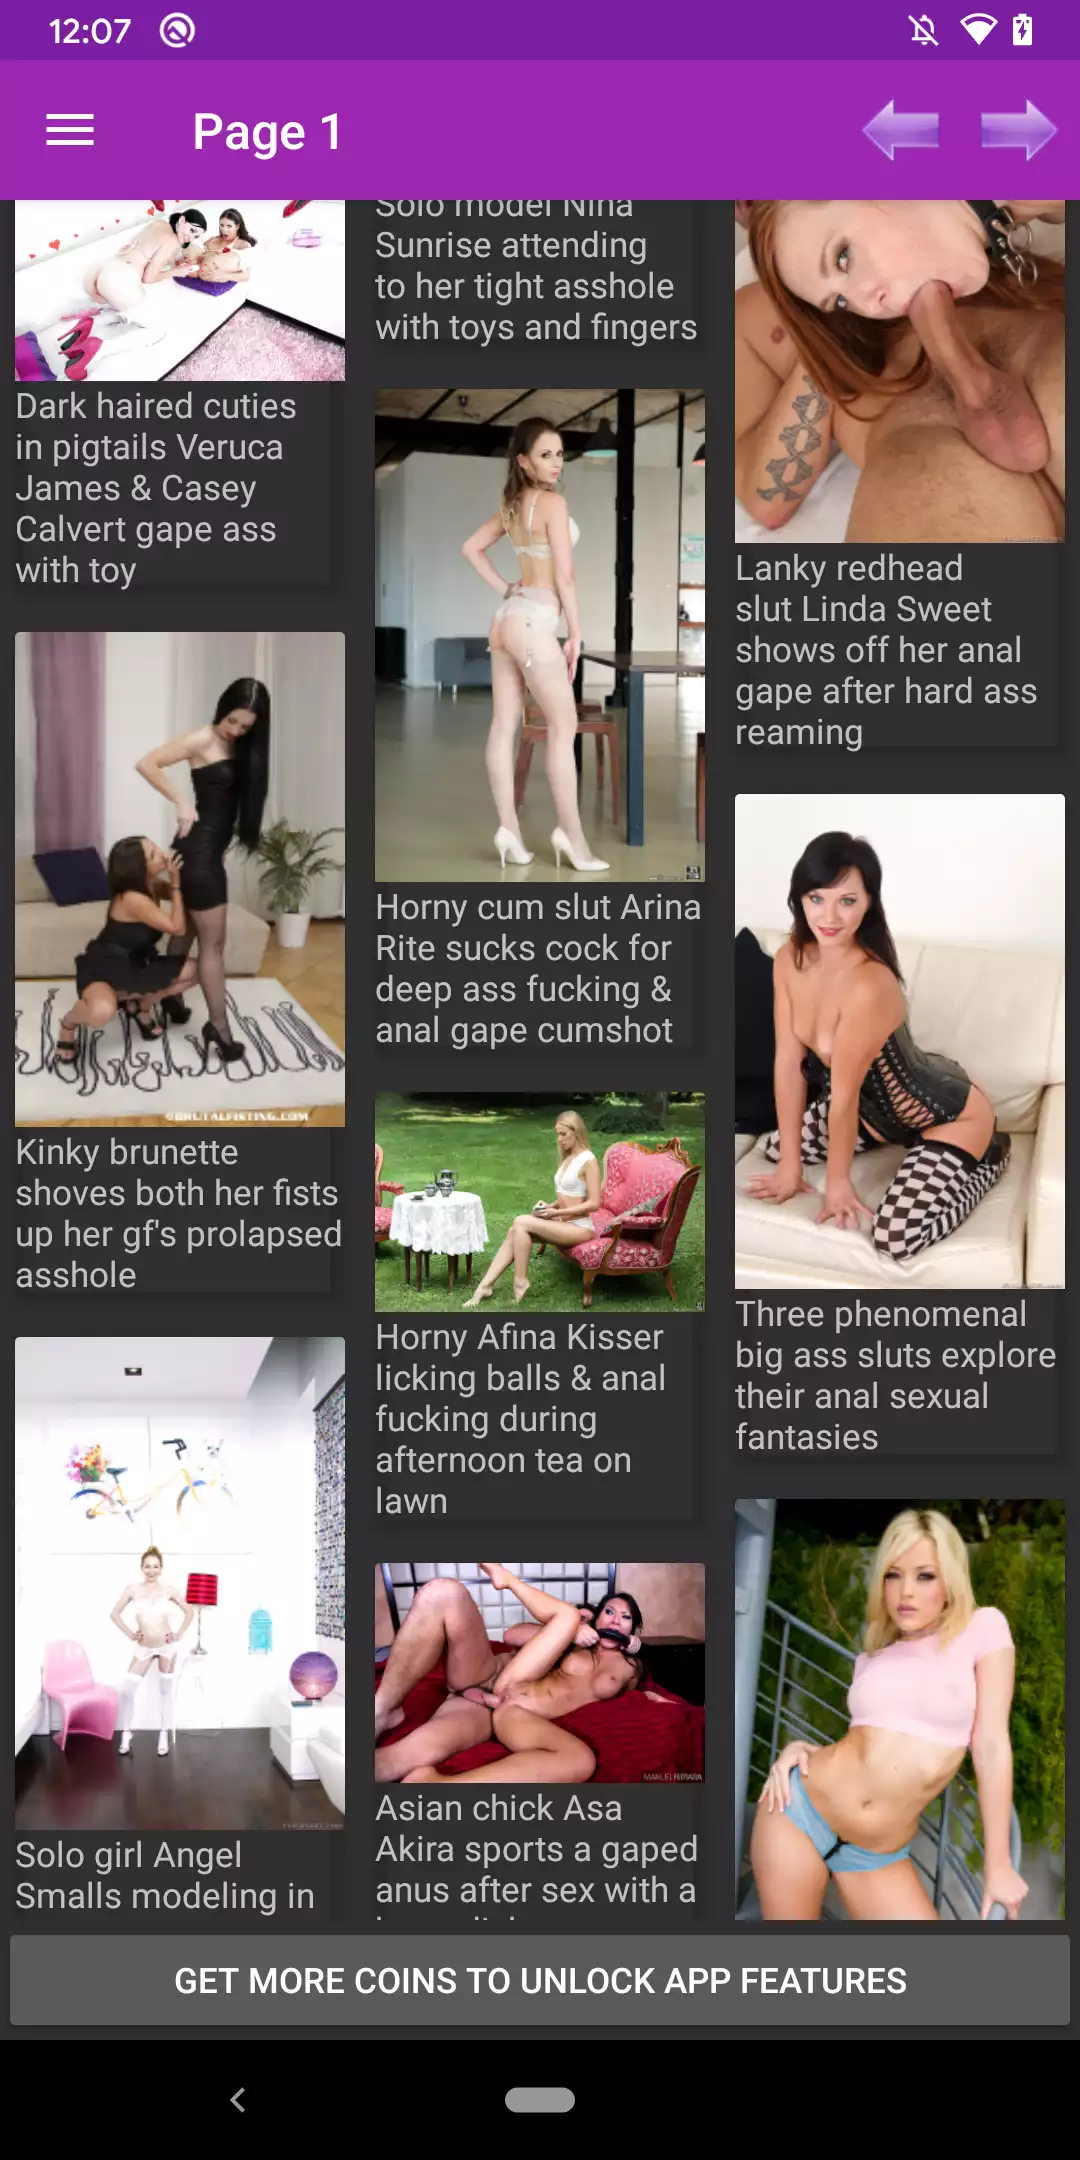 Anal Gape for,pornstars,hentai,sex,wallpaper,gay,pictures,erotic,apk,free,apps,mobile,with,pics,pornstar,photos,android,baixar,app,gape,lily,lane,best,anime,anal,galleries